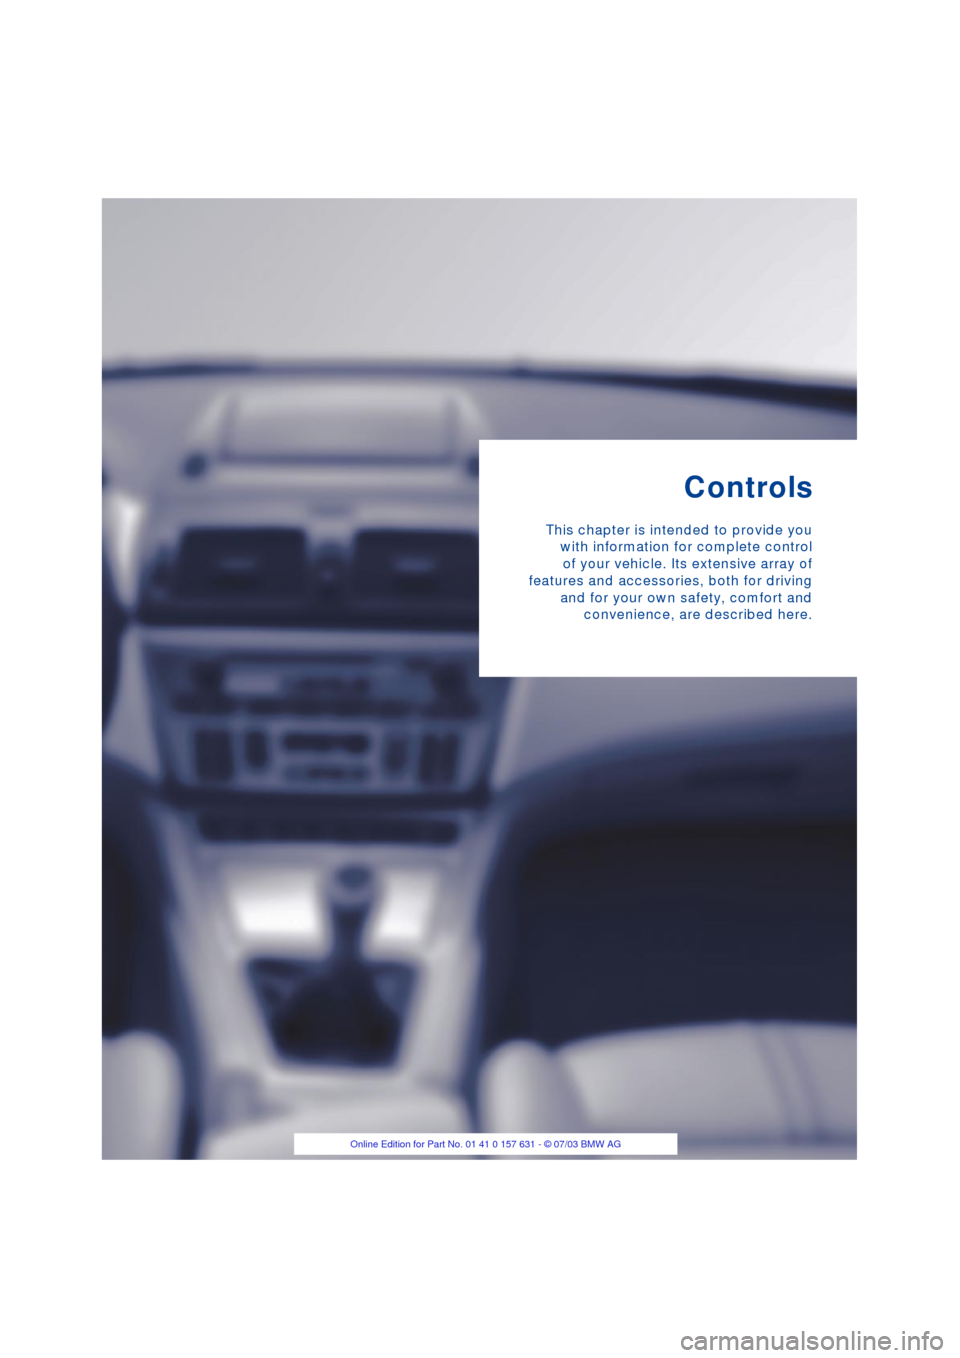 BMW X3 3.0I 2004 E83 User Guide Controls
This chapter is intended to provide you
with information for complete control
of your vehicle. Its extensive array of
features and accessories, both for driving
and for your own safety, comfo